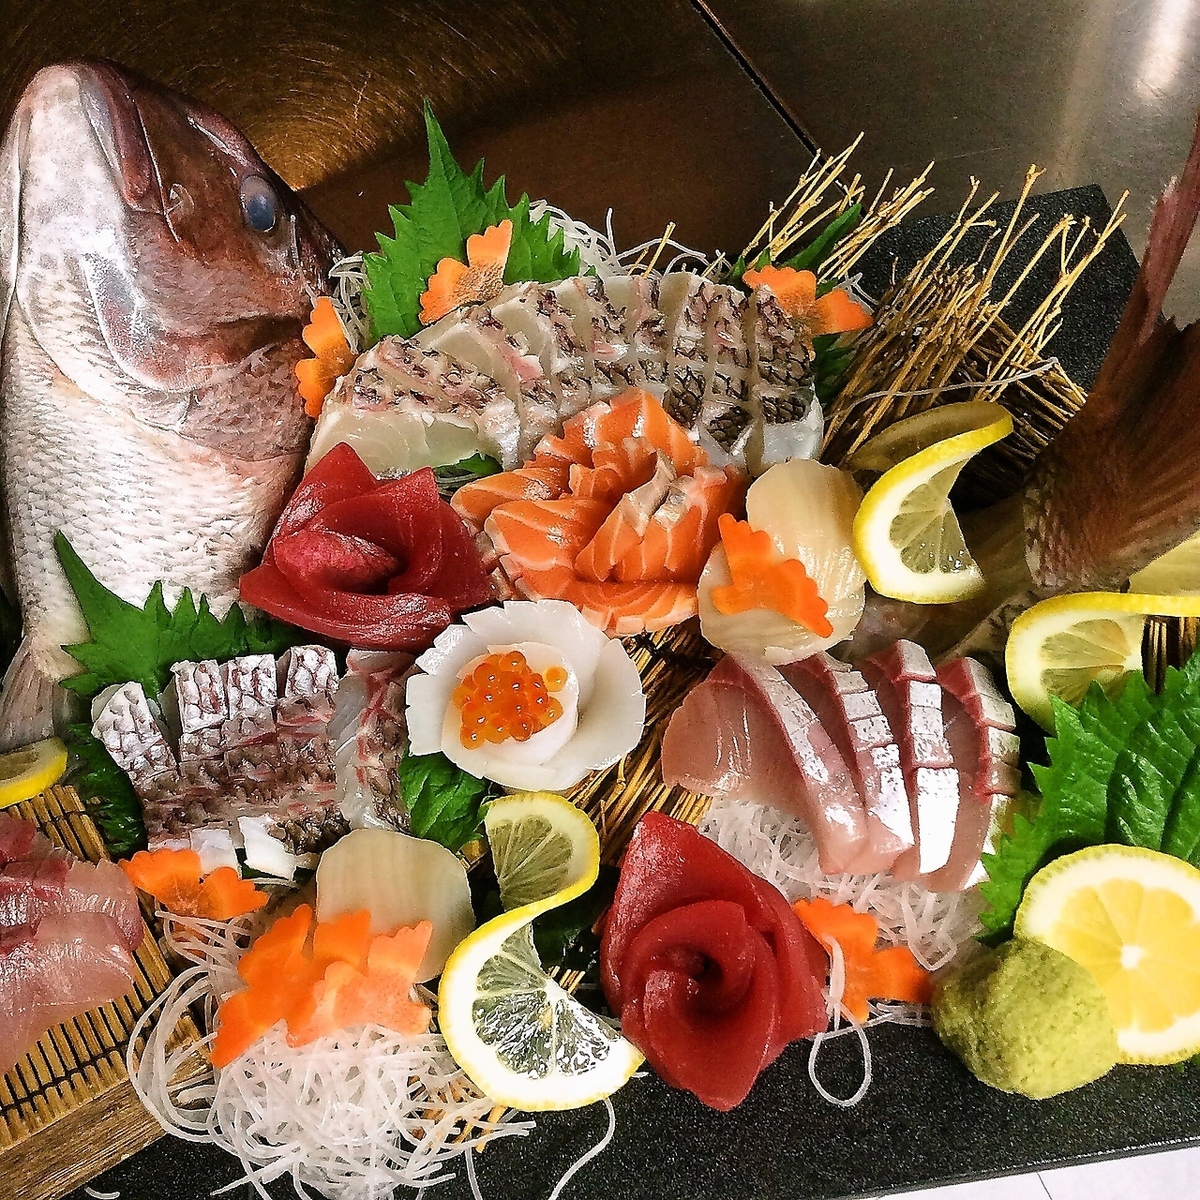 I can not get the natural fresh fish ち